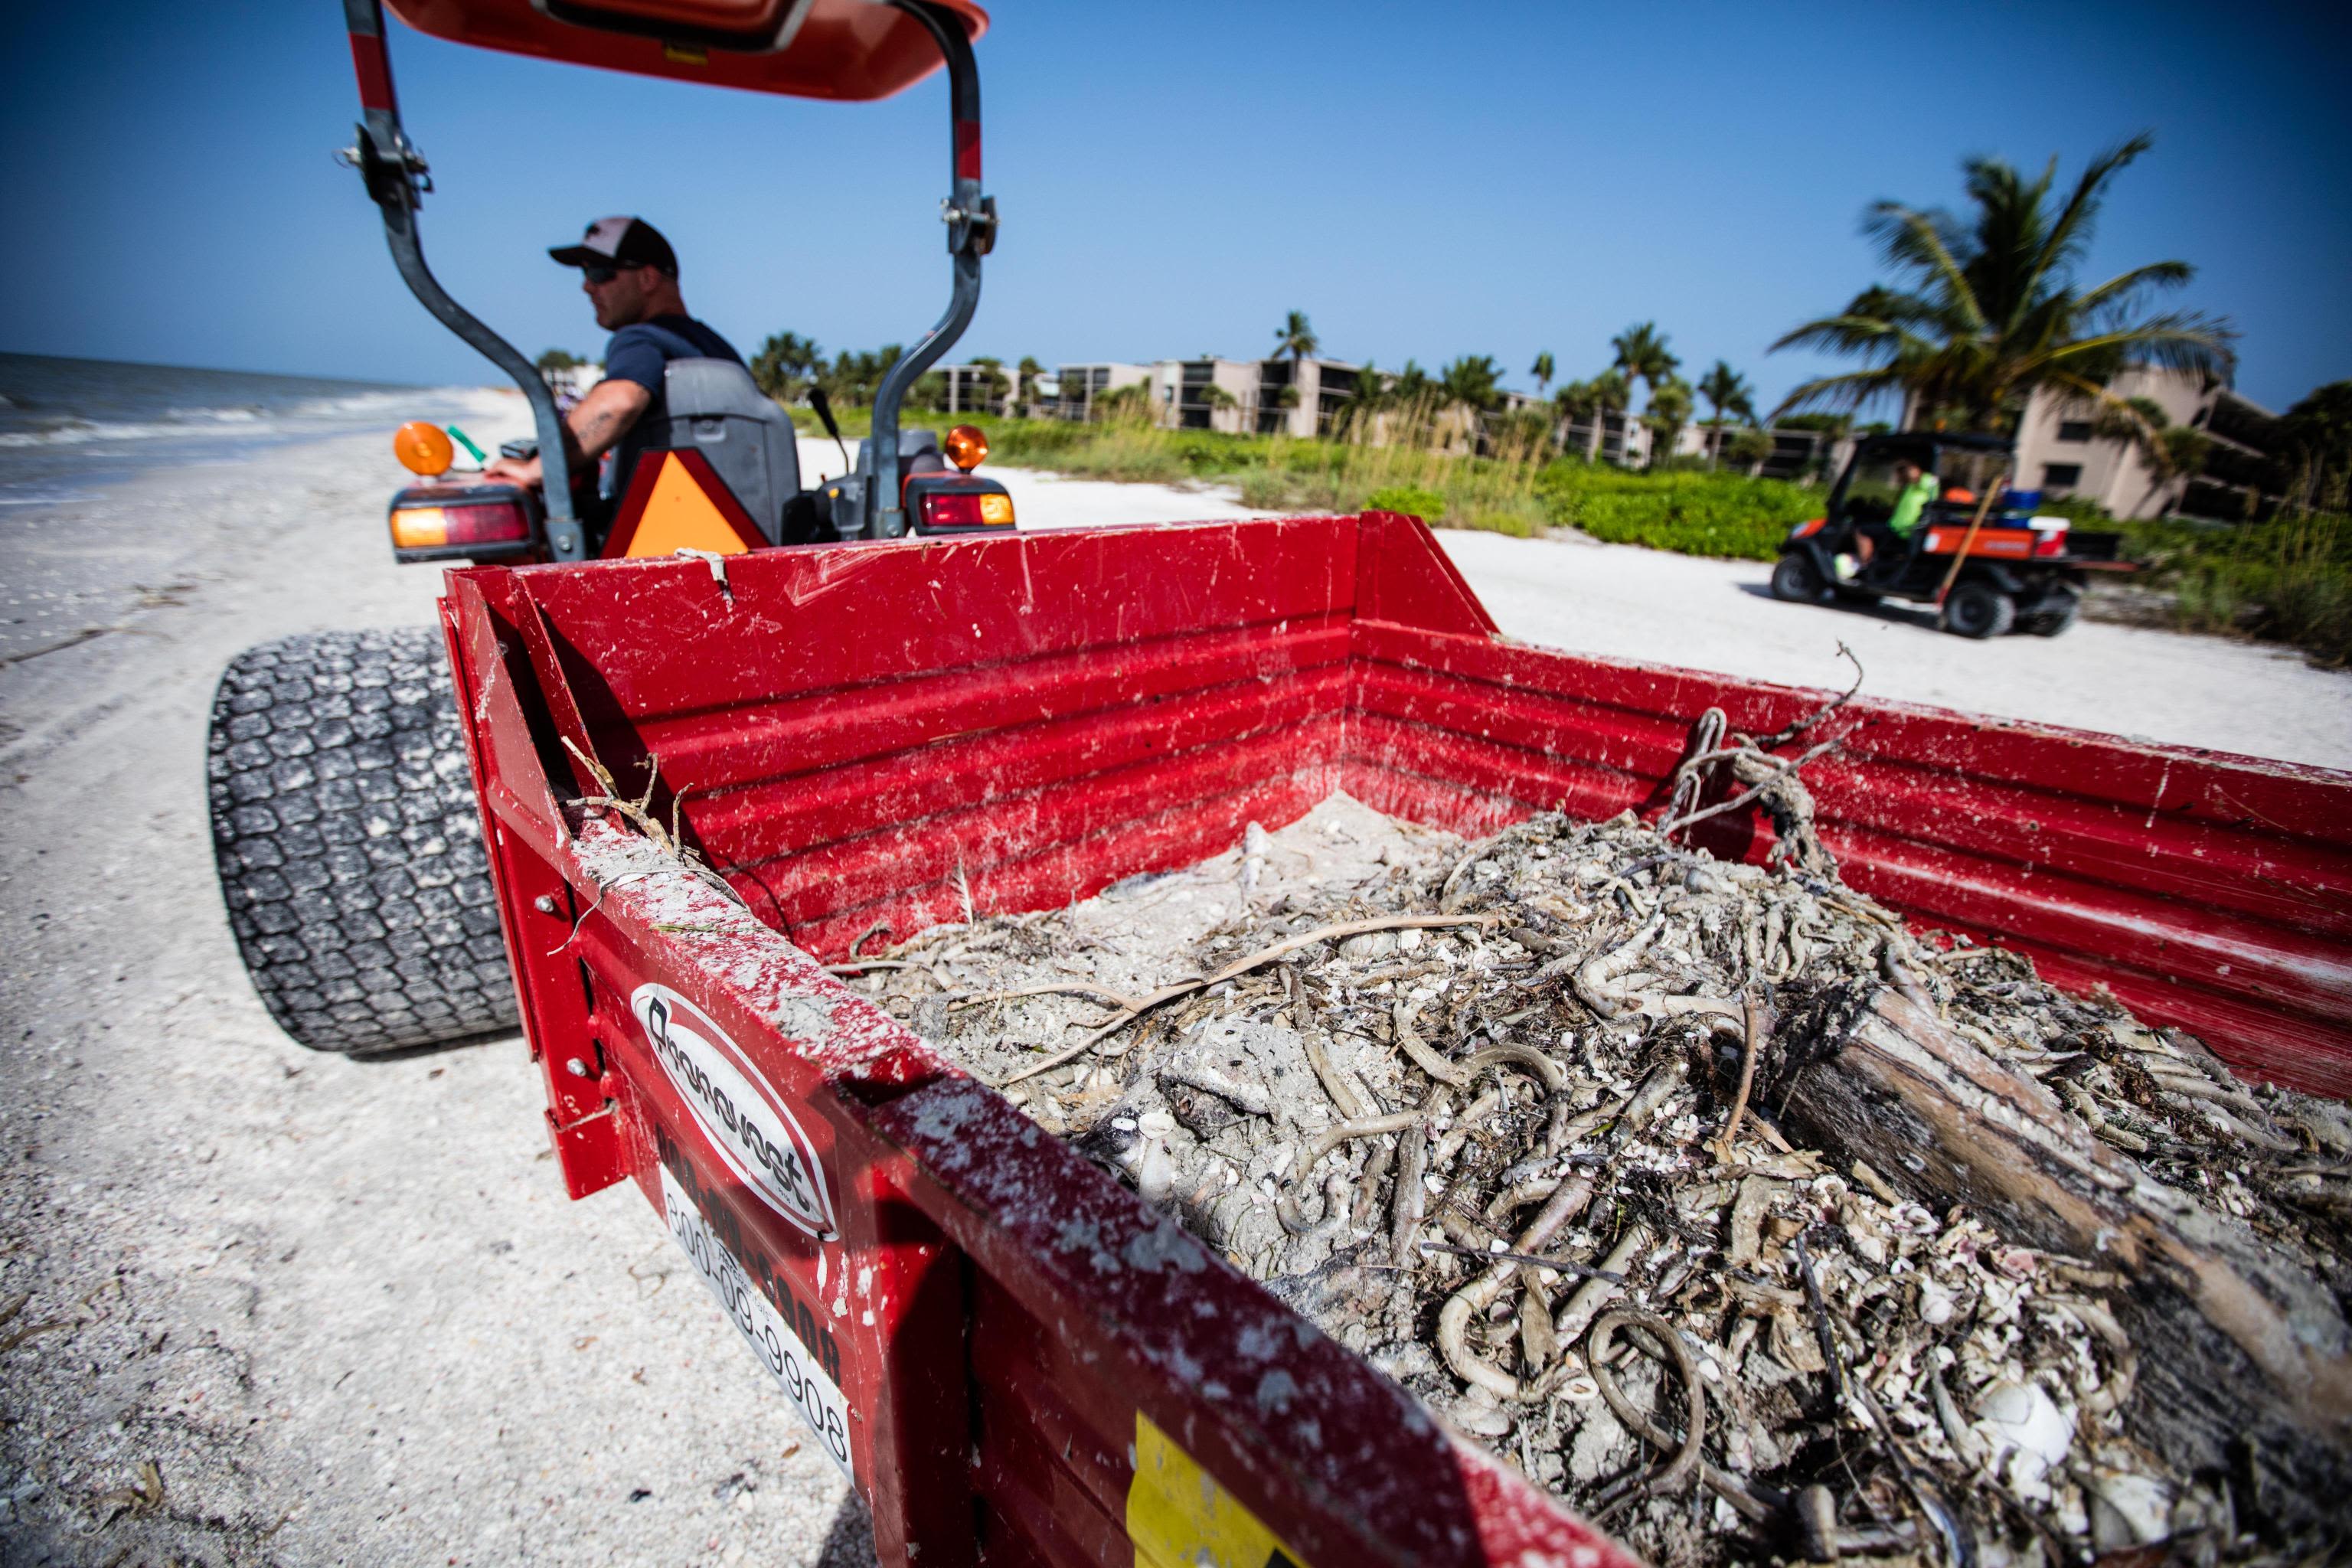 A foul task: They pick up Florida's red tide corpses